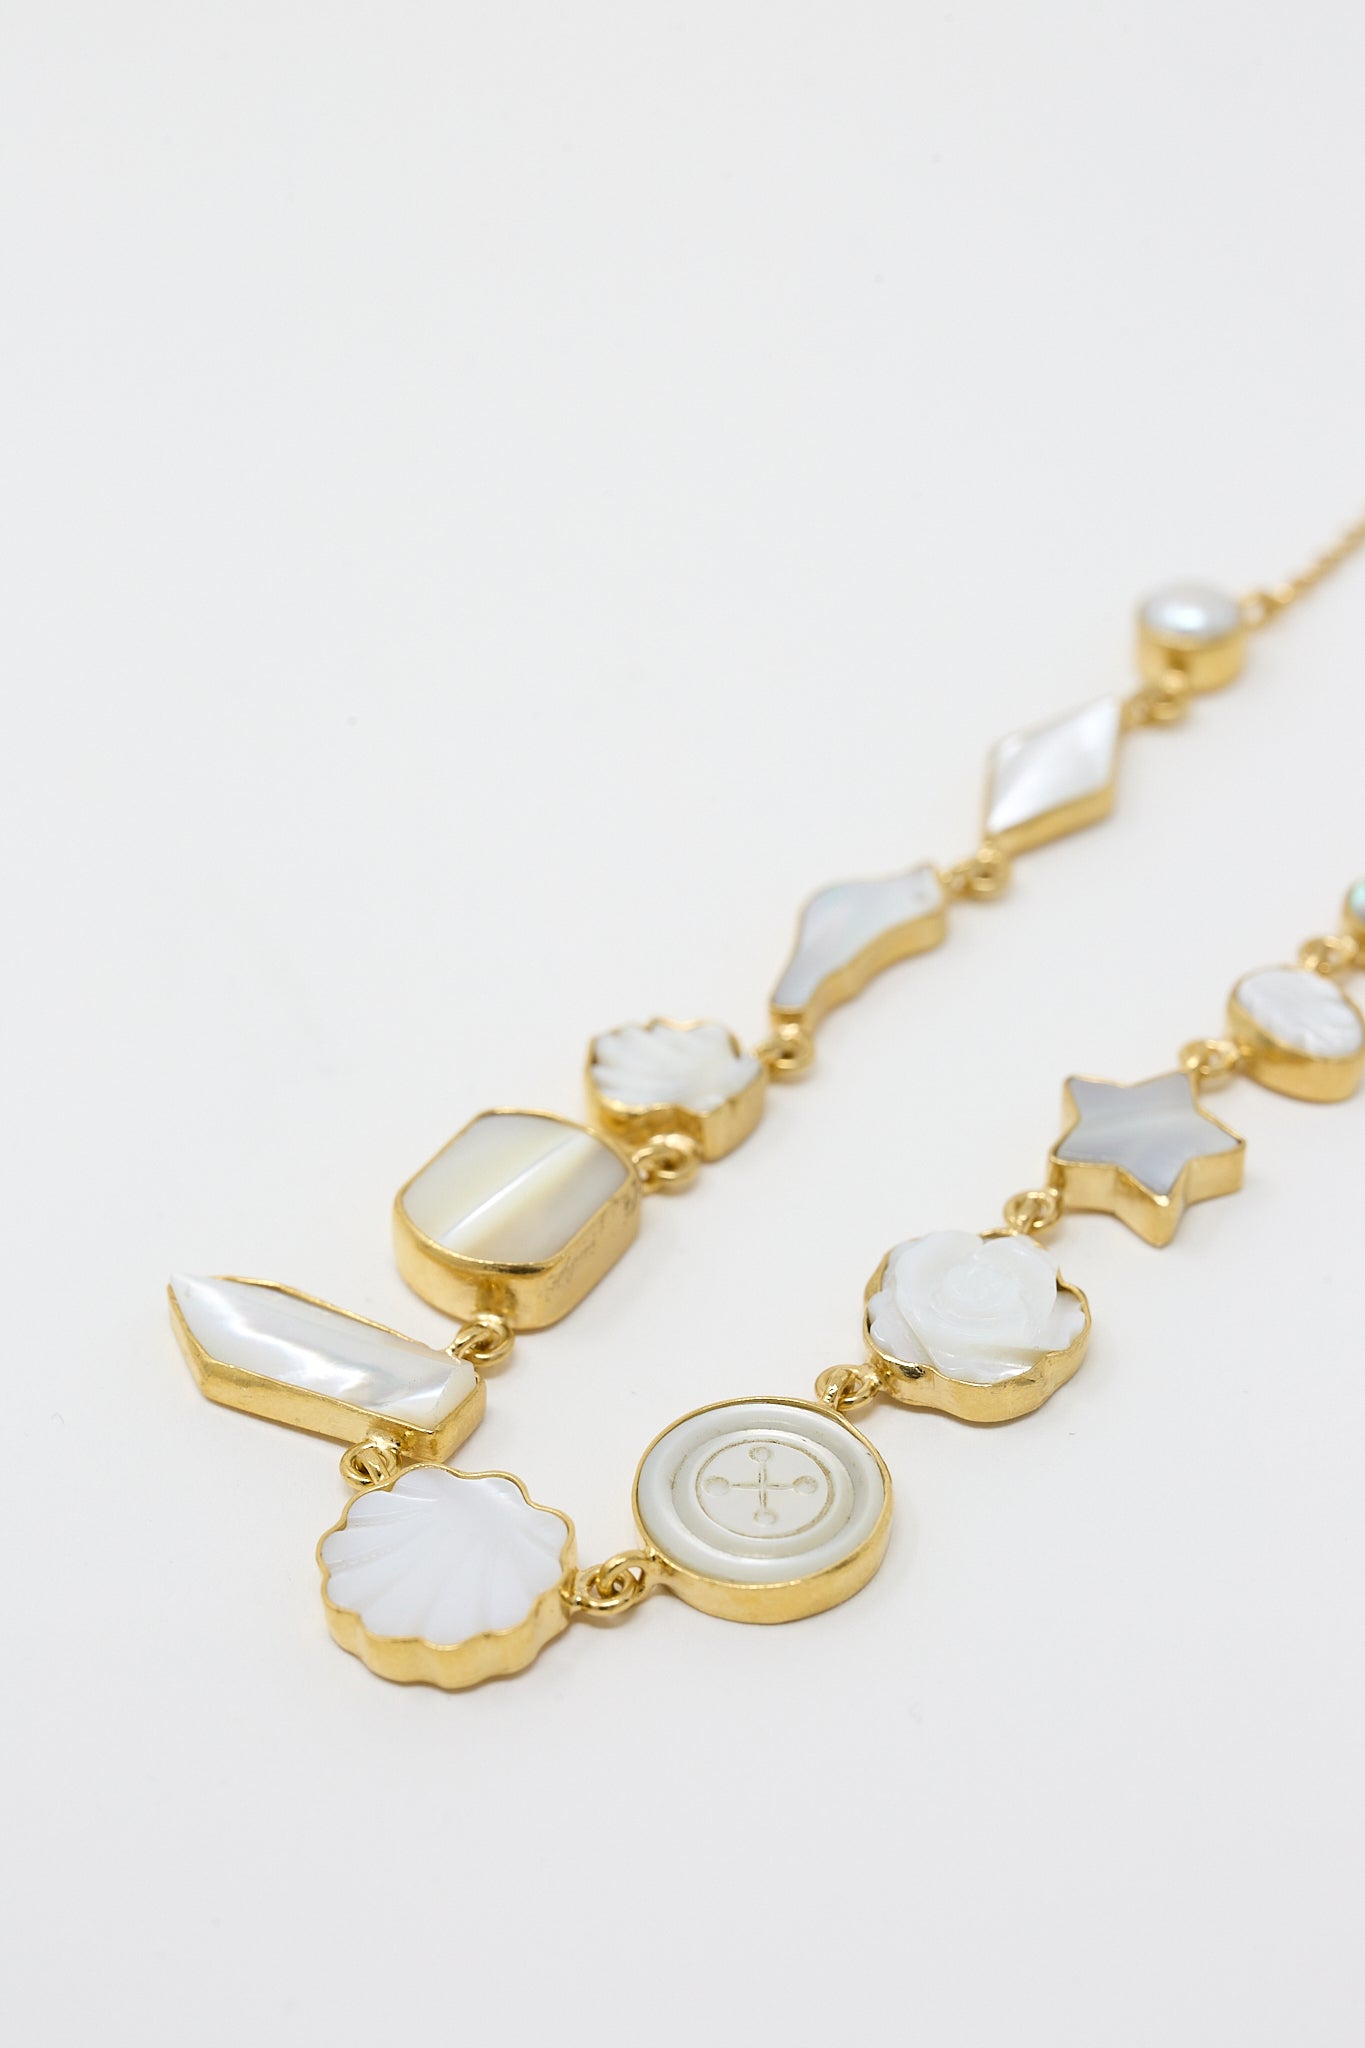 A gold-plated Pearl and Shell Necklace with a Mother of Pearl charm by Grainne Morton.